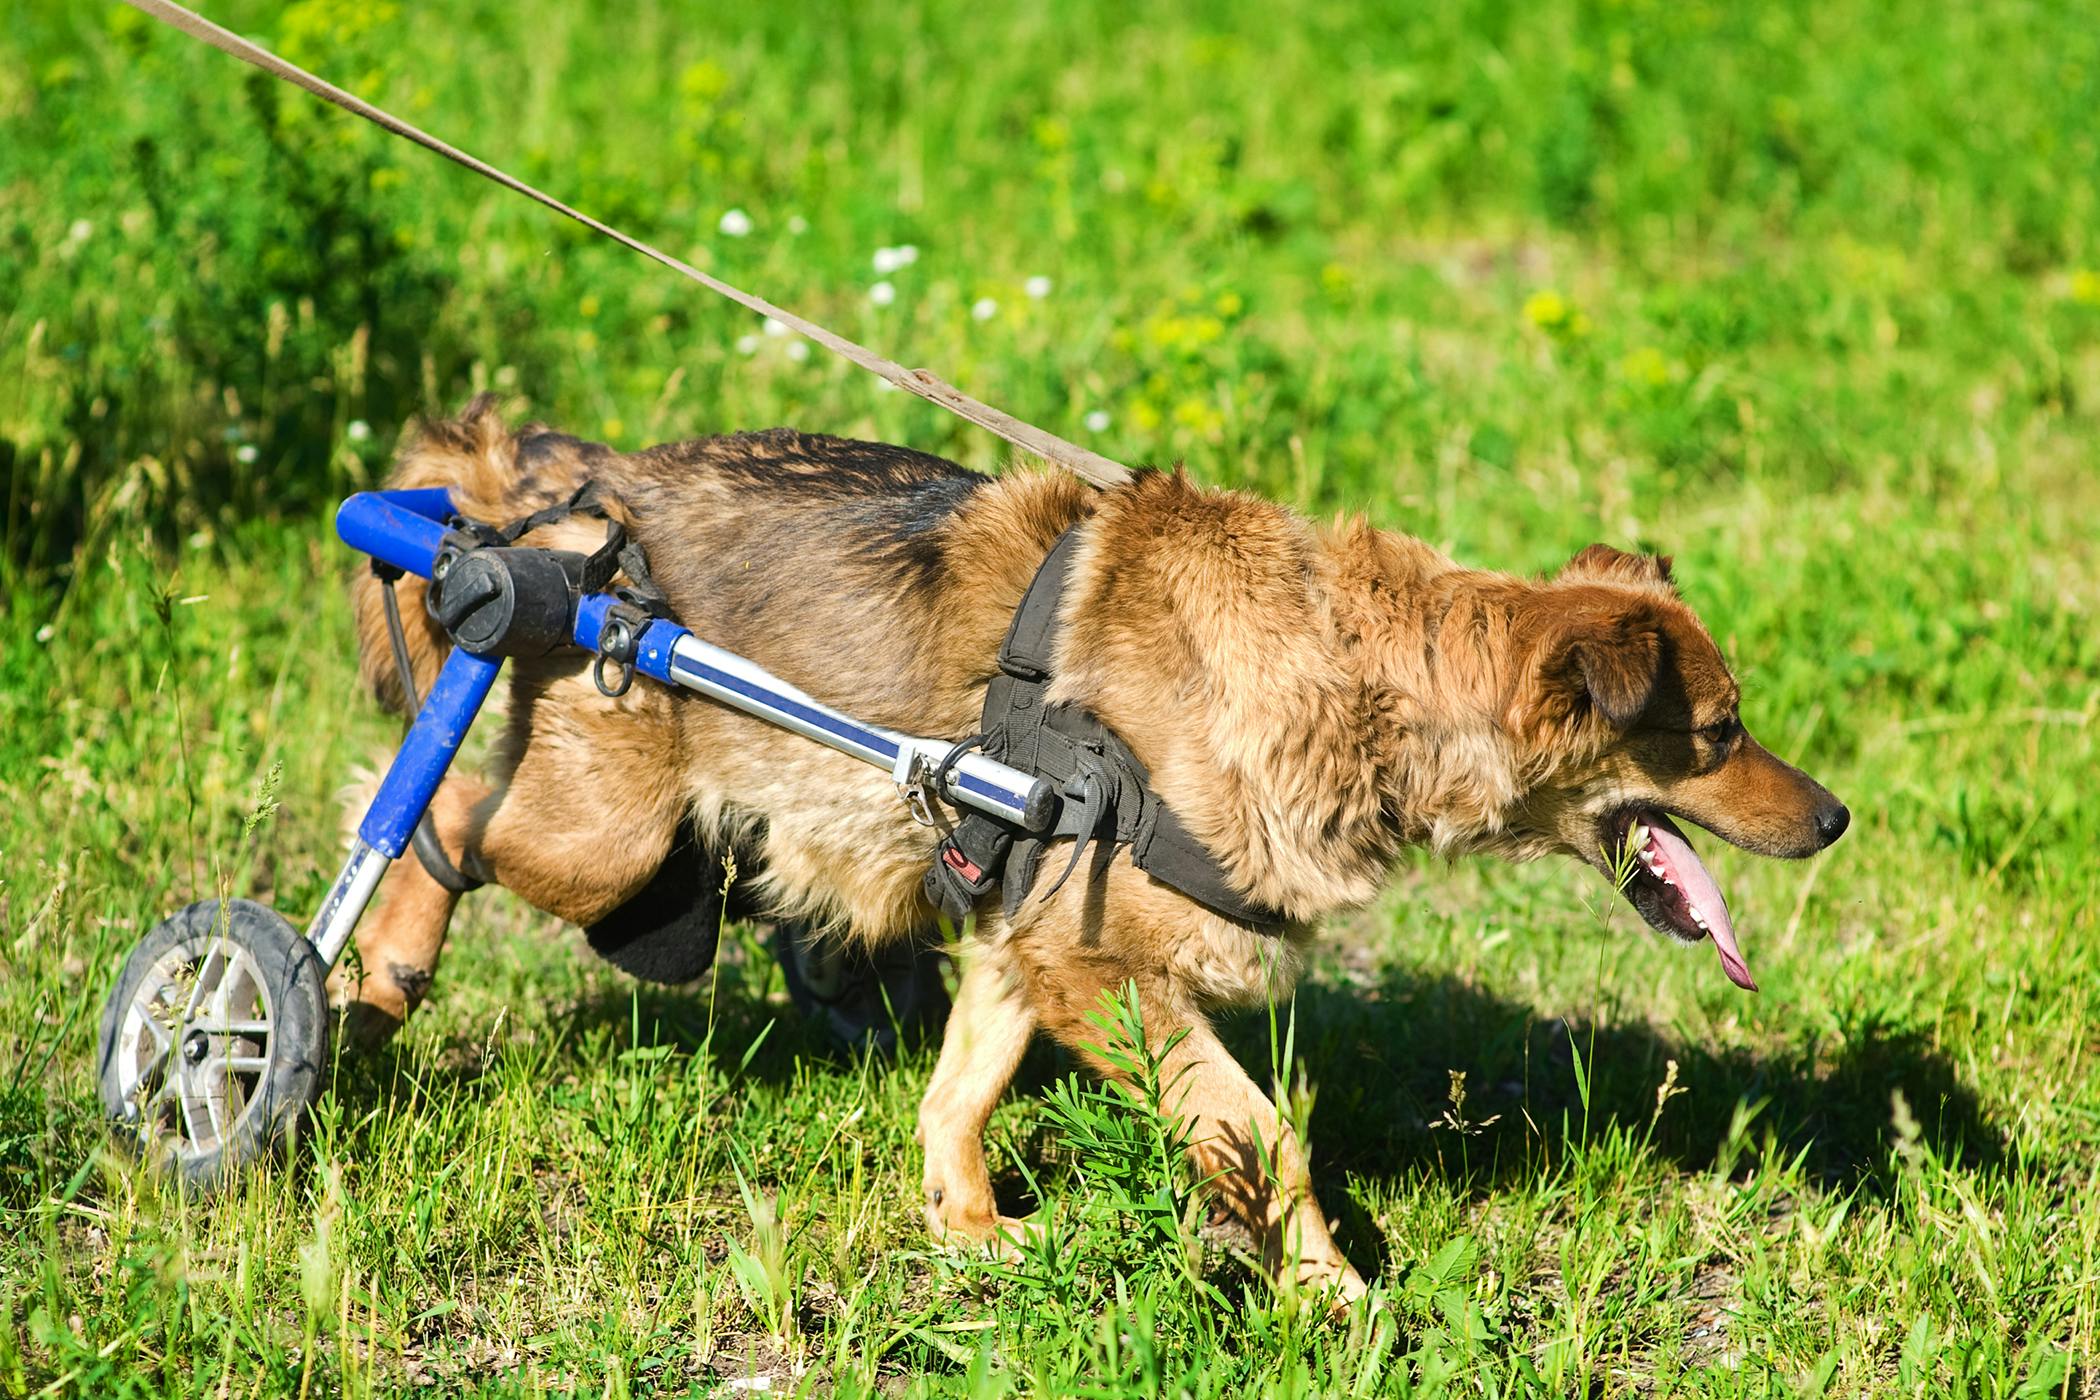 Cervical Dorsal Laminectomy in Dogs Procedure, Efficacy